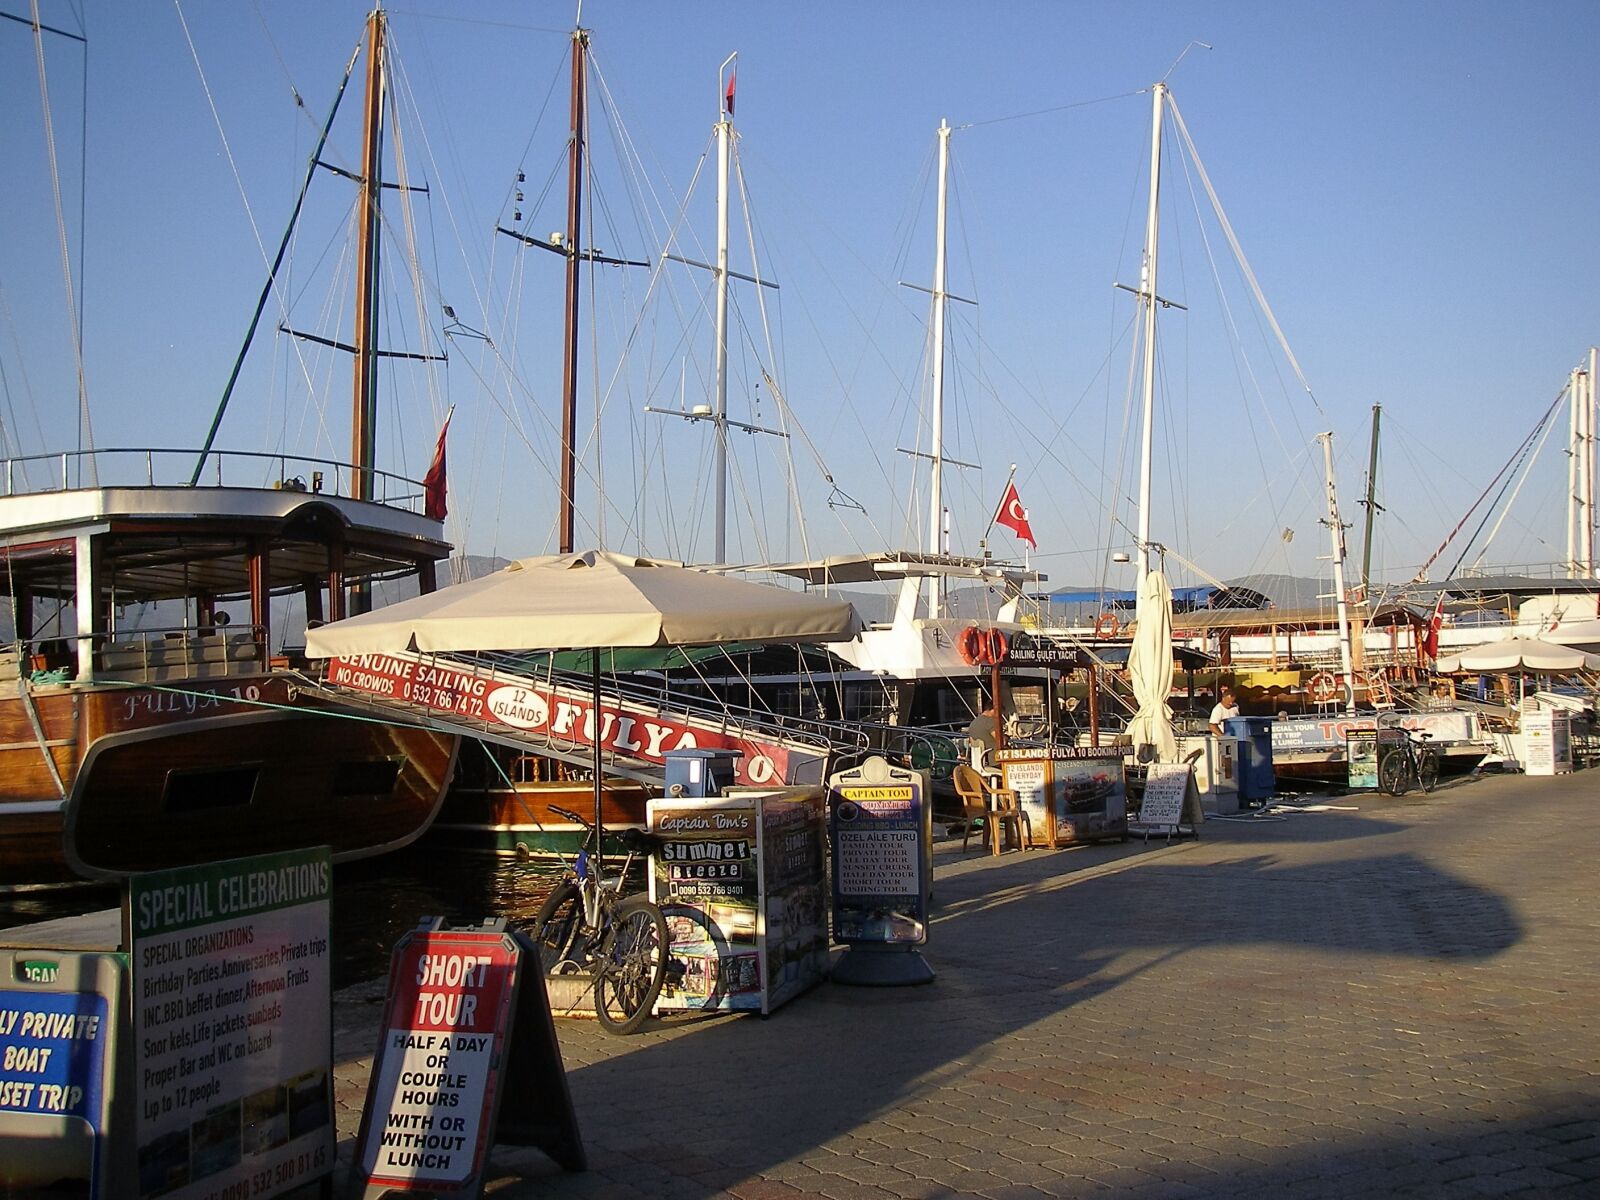 Olympus SP700 sample photo. Turkey, harbour, boats photography